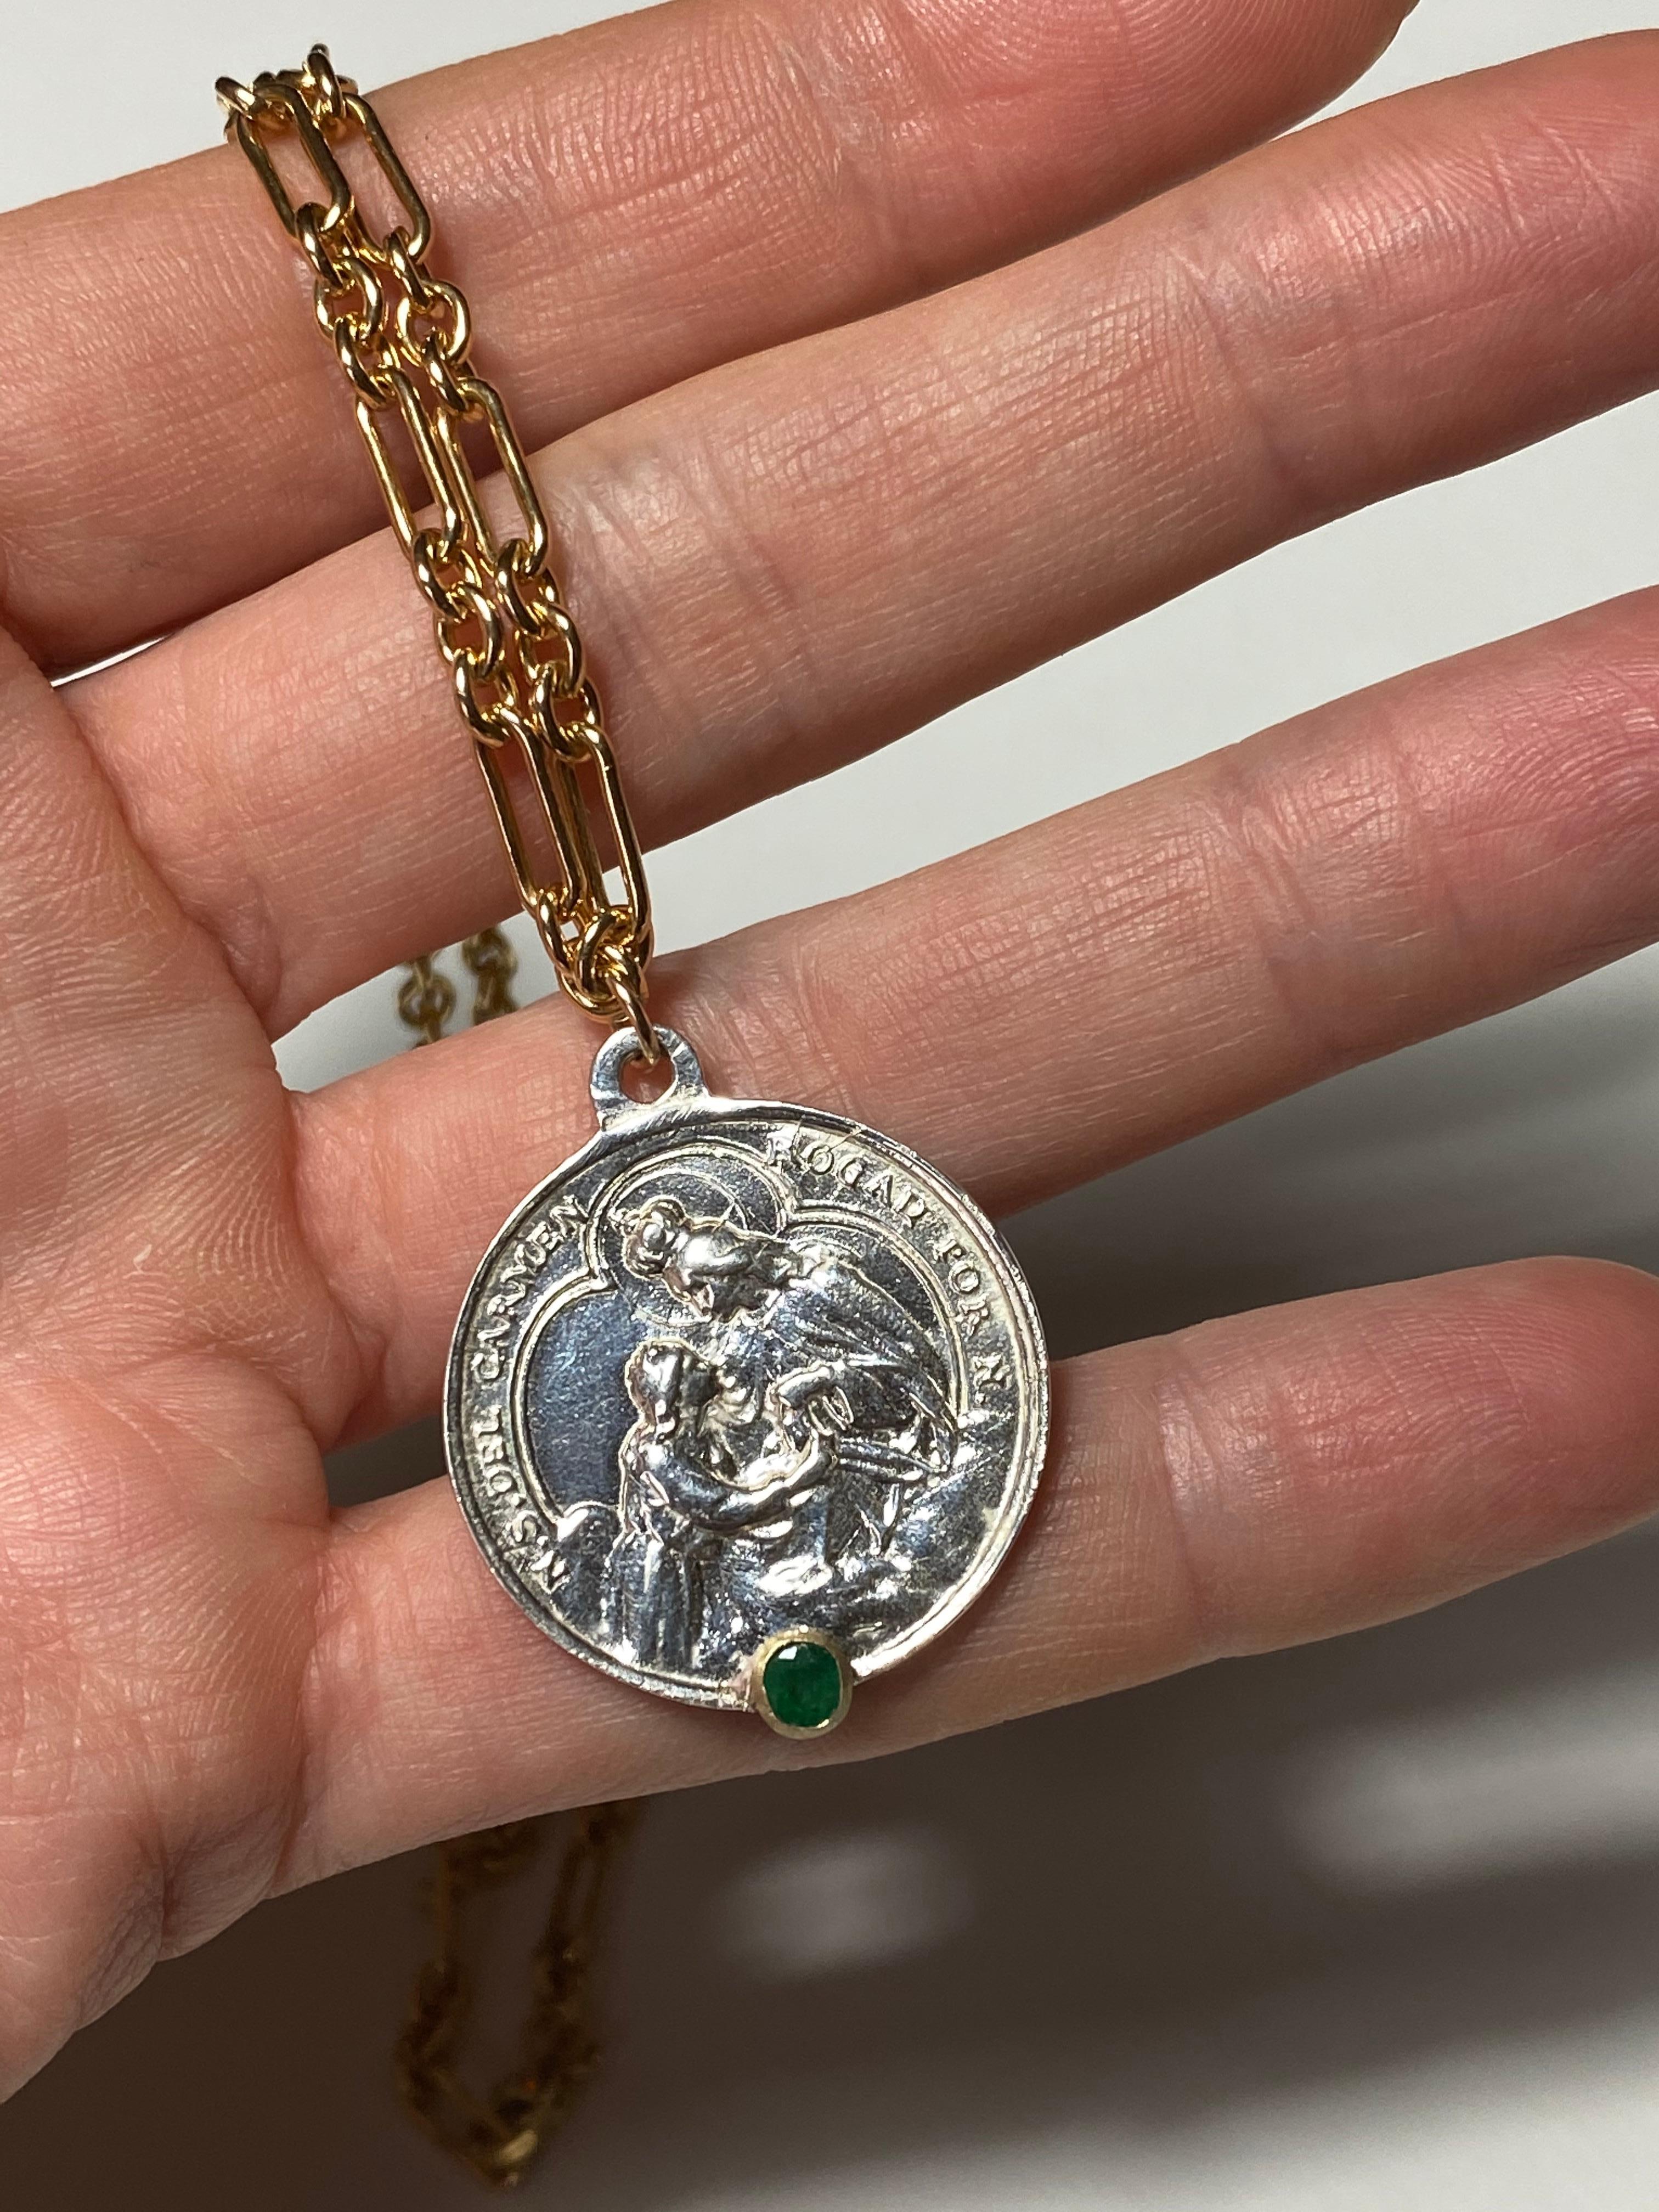 how to make a coin into a necklace without making a hole